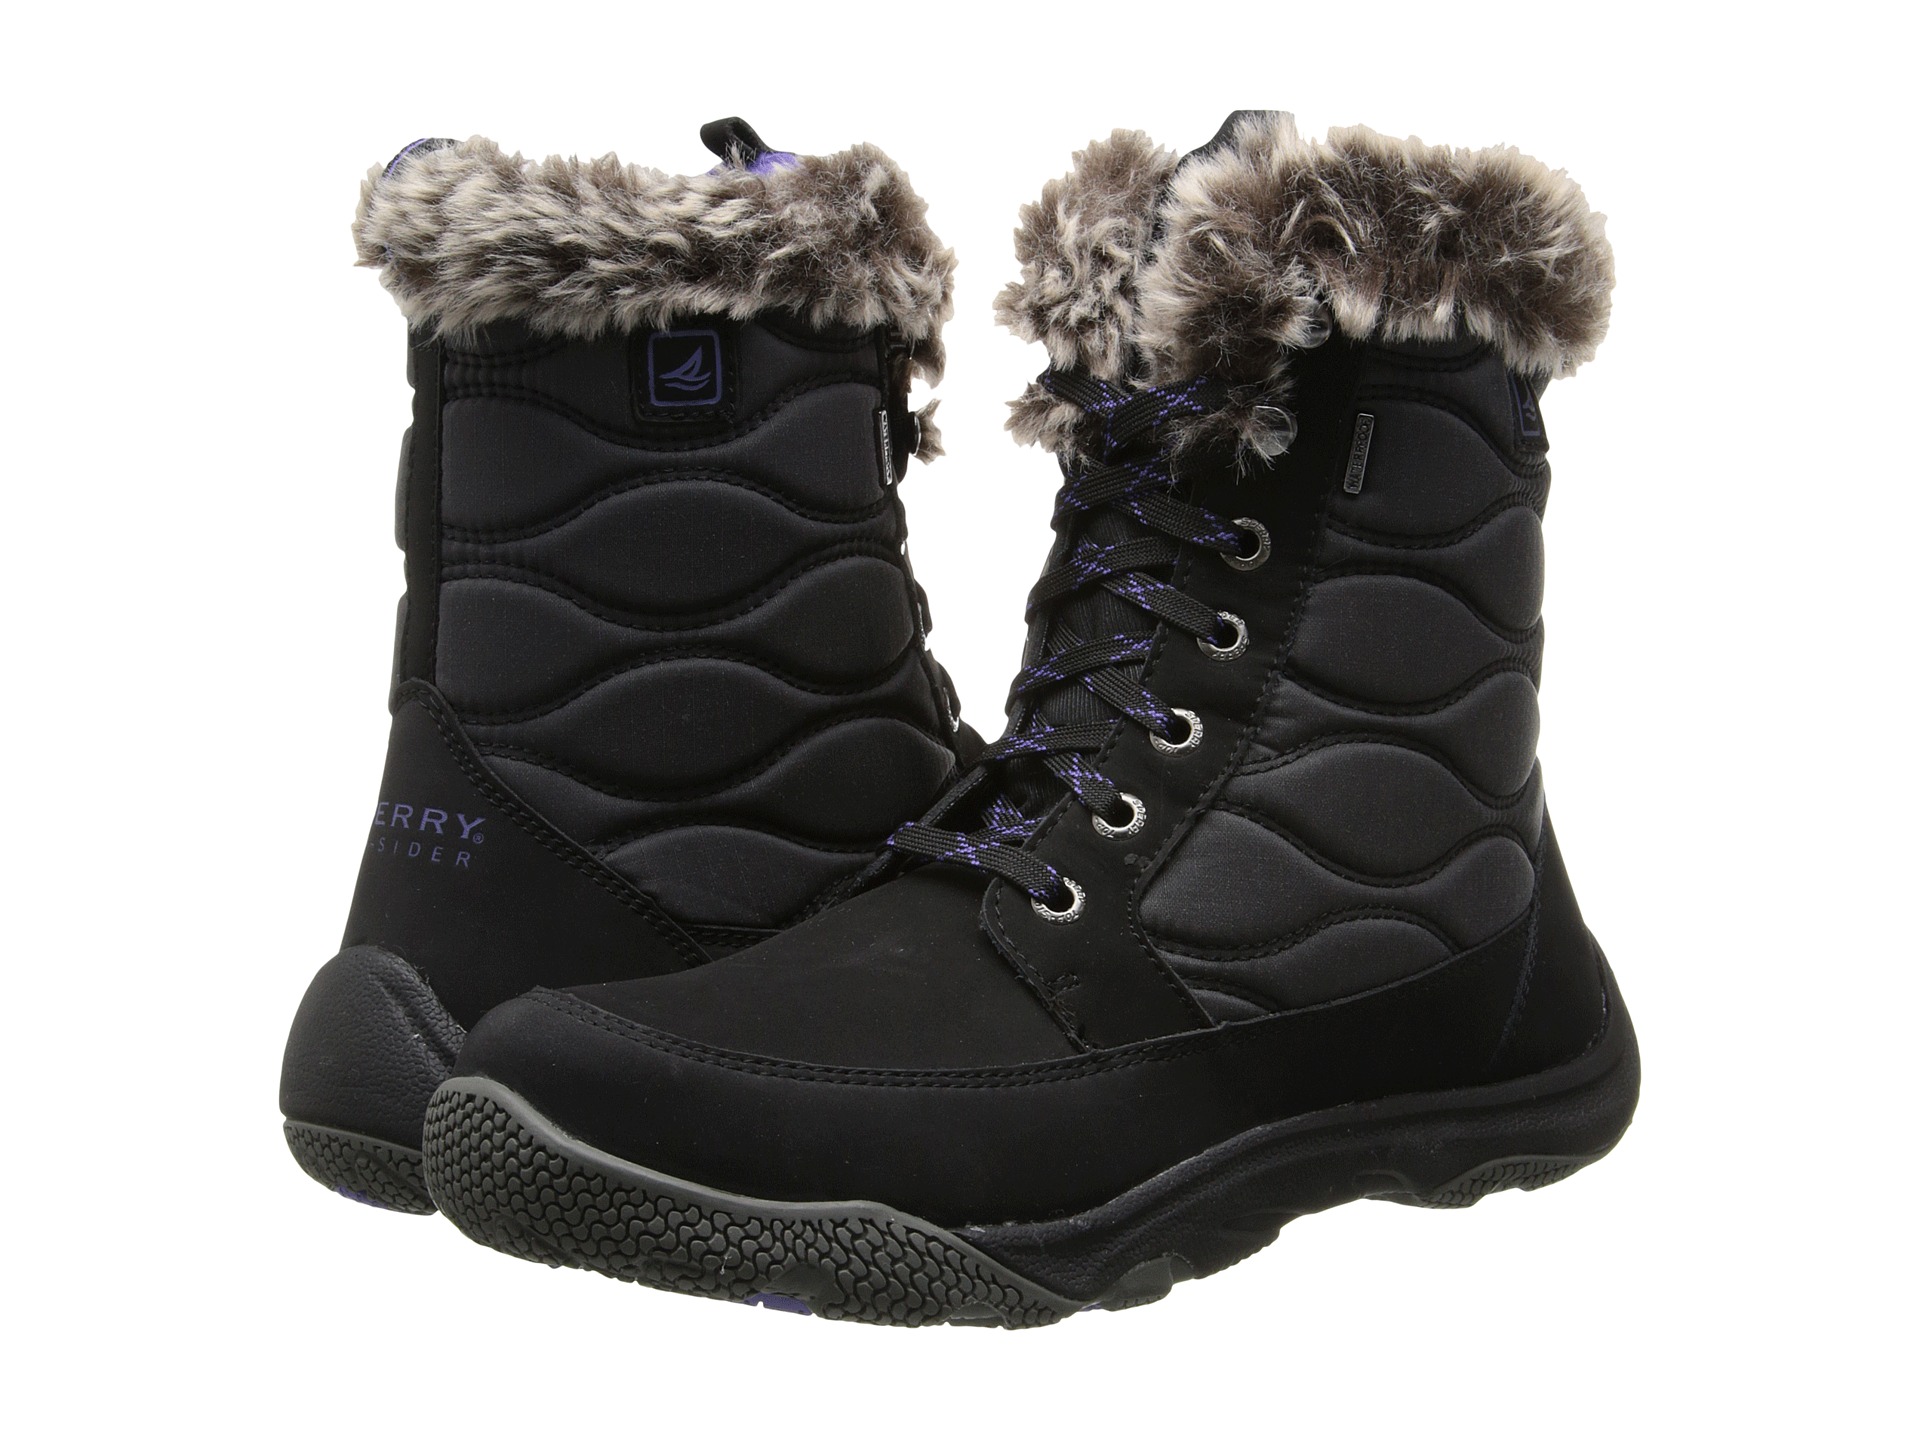 Sperry Top Sider Winter Cove Boot | Shipped Free at Zappos